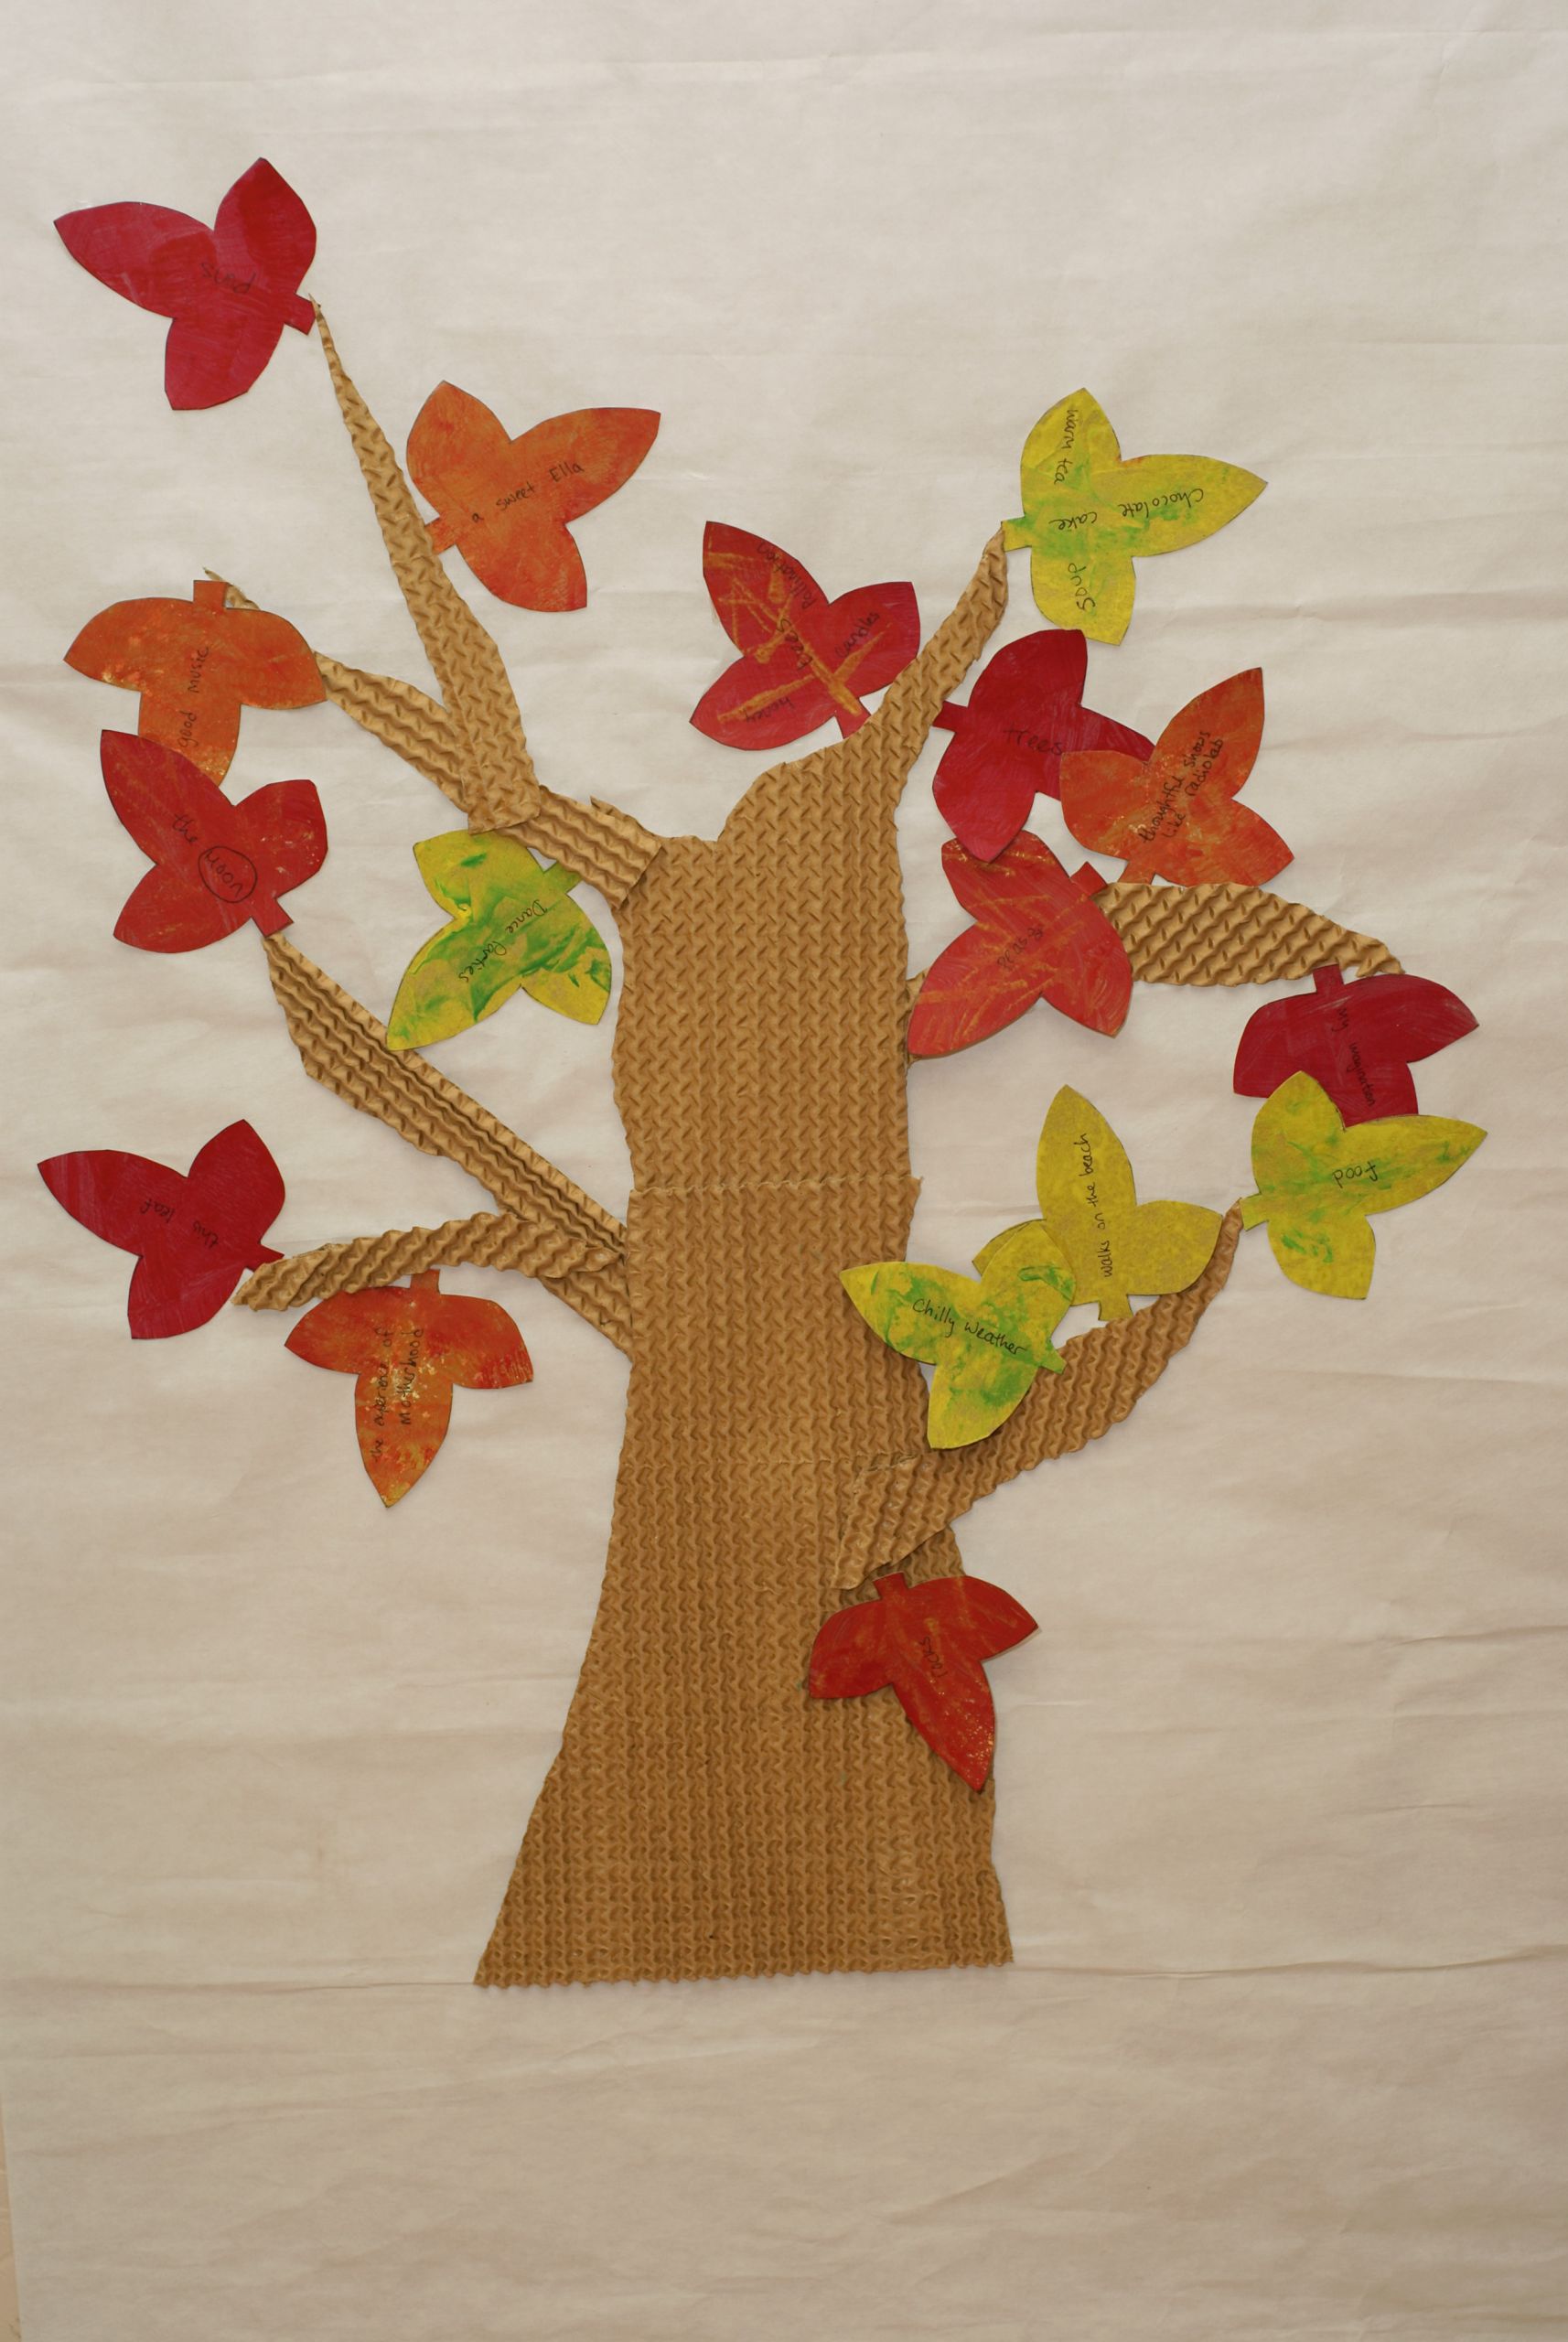 Autumn Arts And Crafts
 The Tree of Gratitude – A Fall Art Project